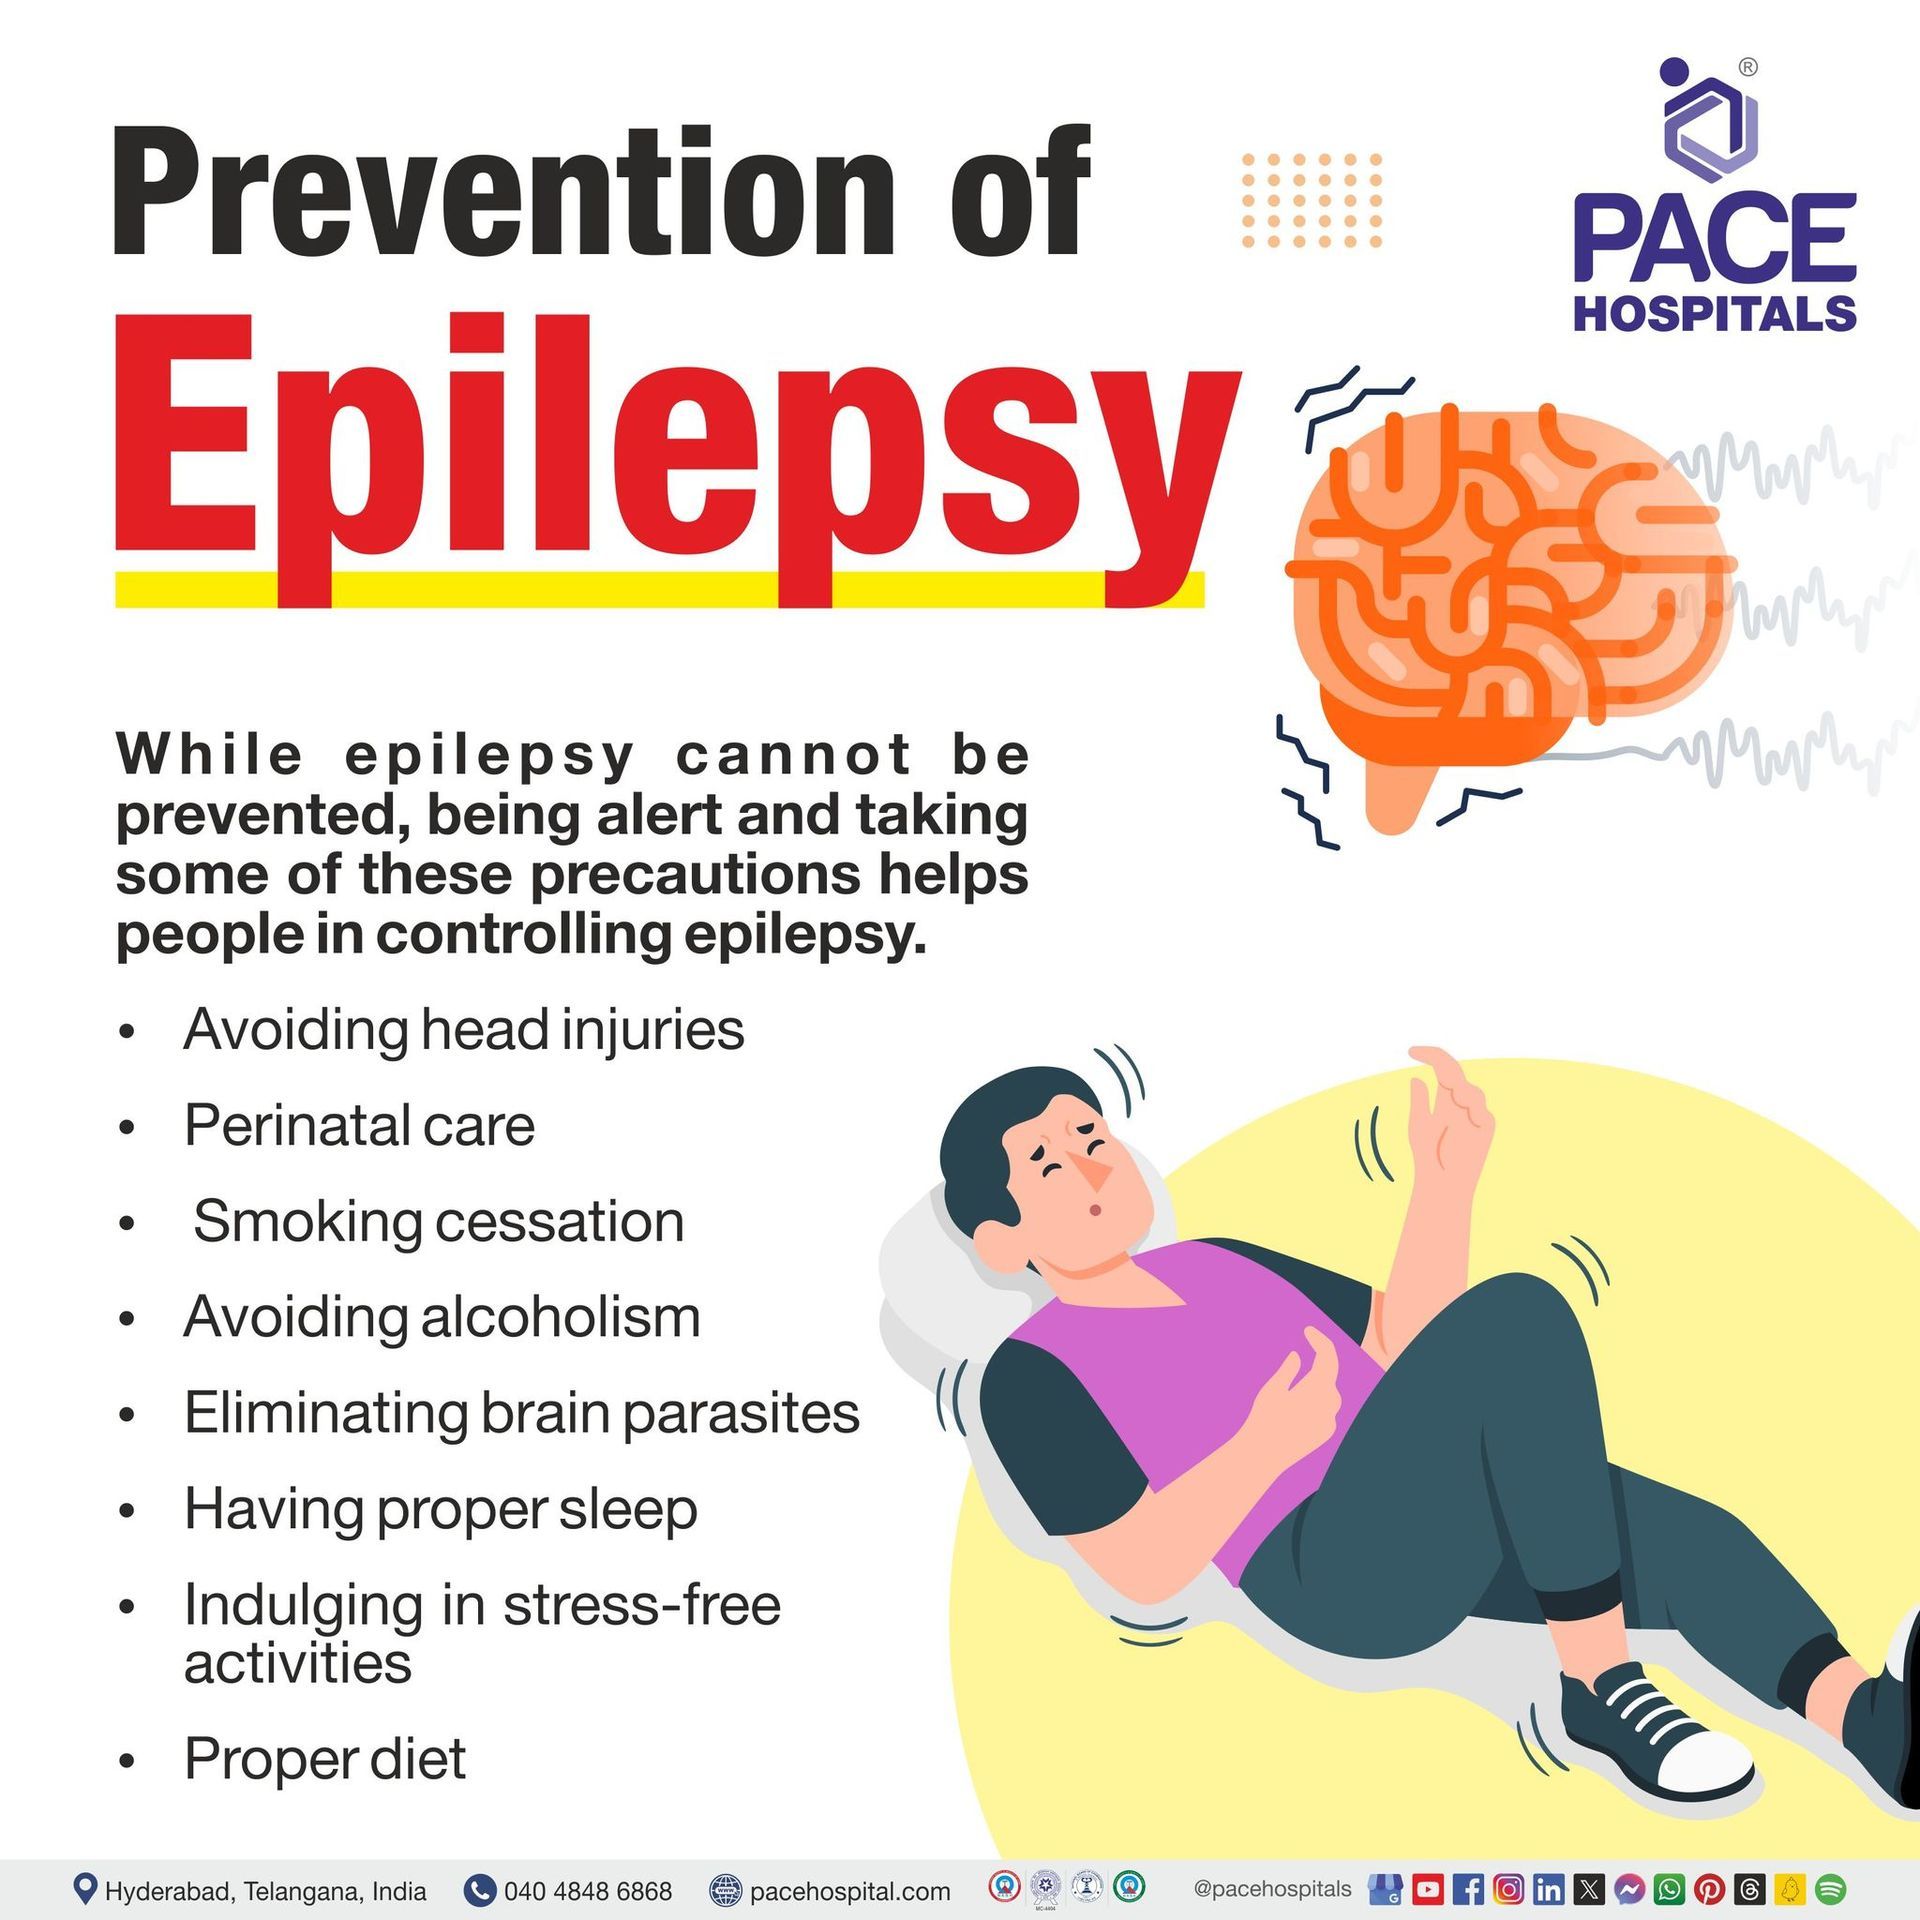 Epilepsy prevention | Preventing seizures | Epilepsy preventive measures | Epilepsy precautionary measures | Person with epilepsy lying on the ground | tips explaining preventive measures of Epilepsy